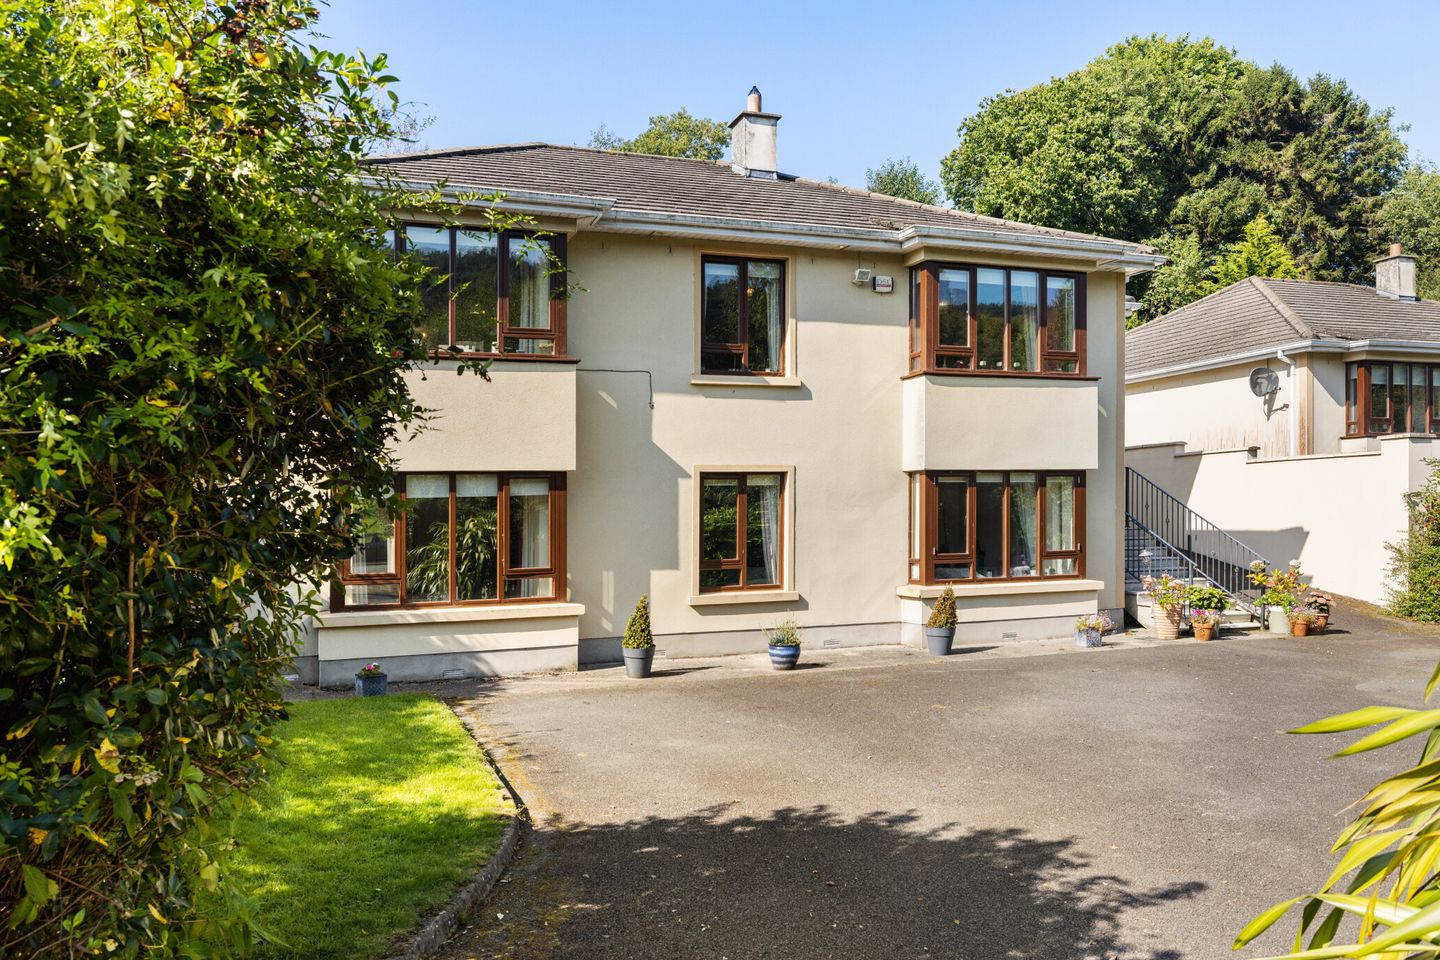 18 Annsbrook, Glenealy, County Wicklow, A67WV05